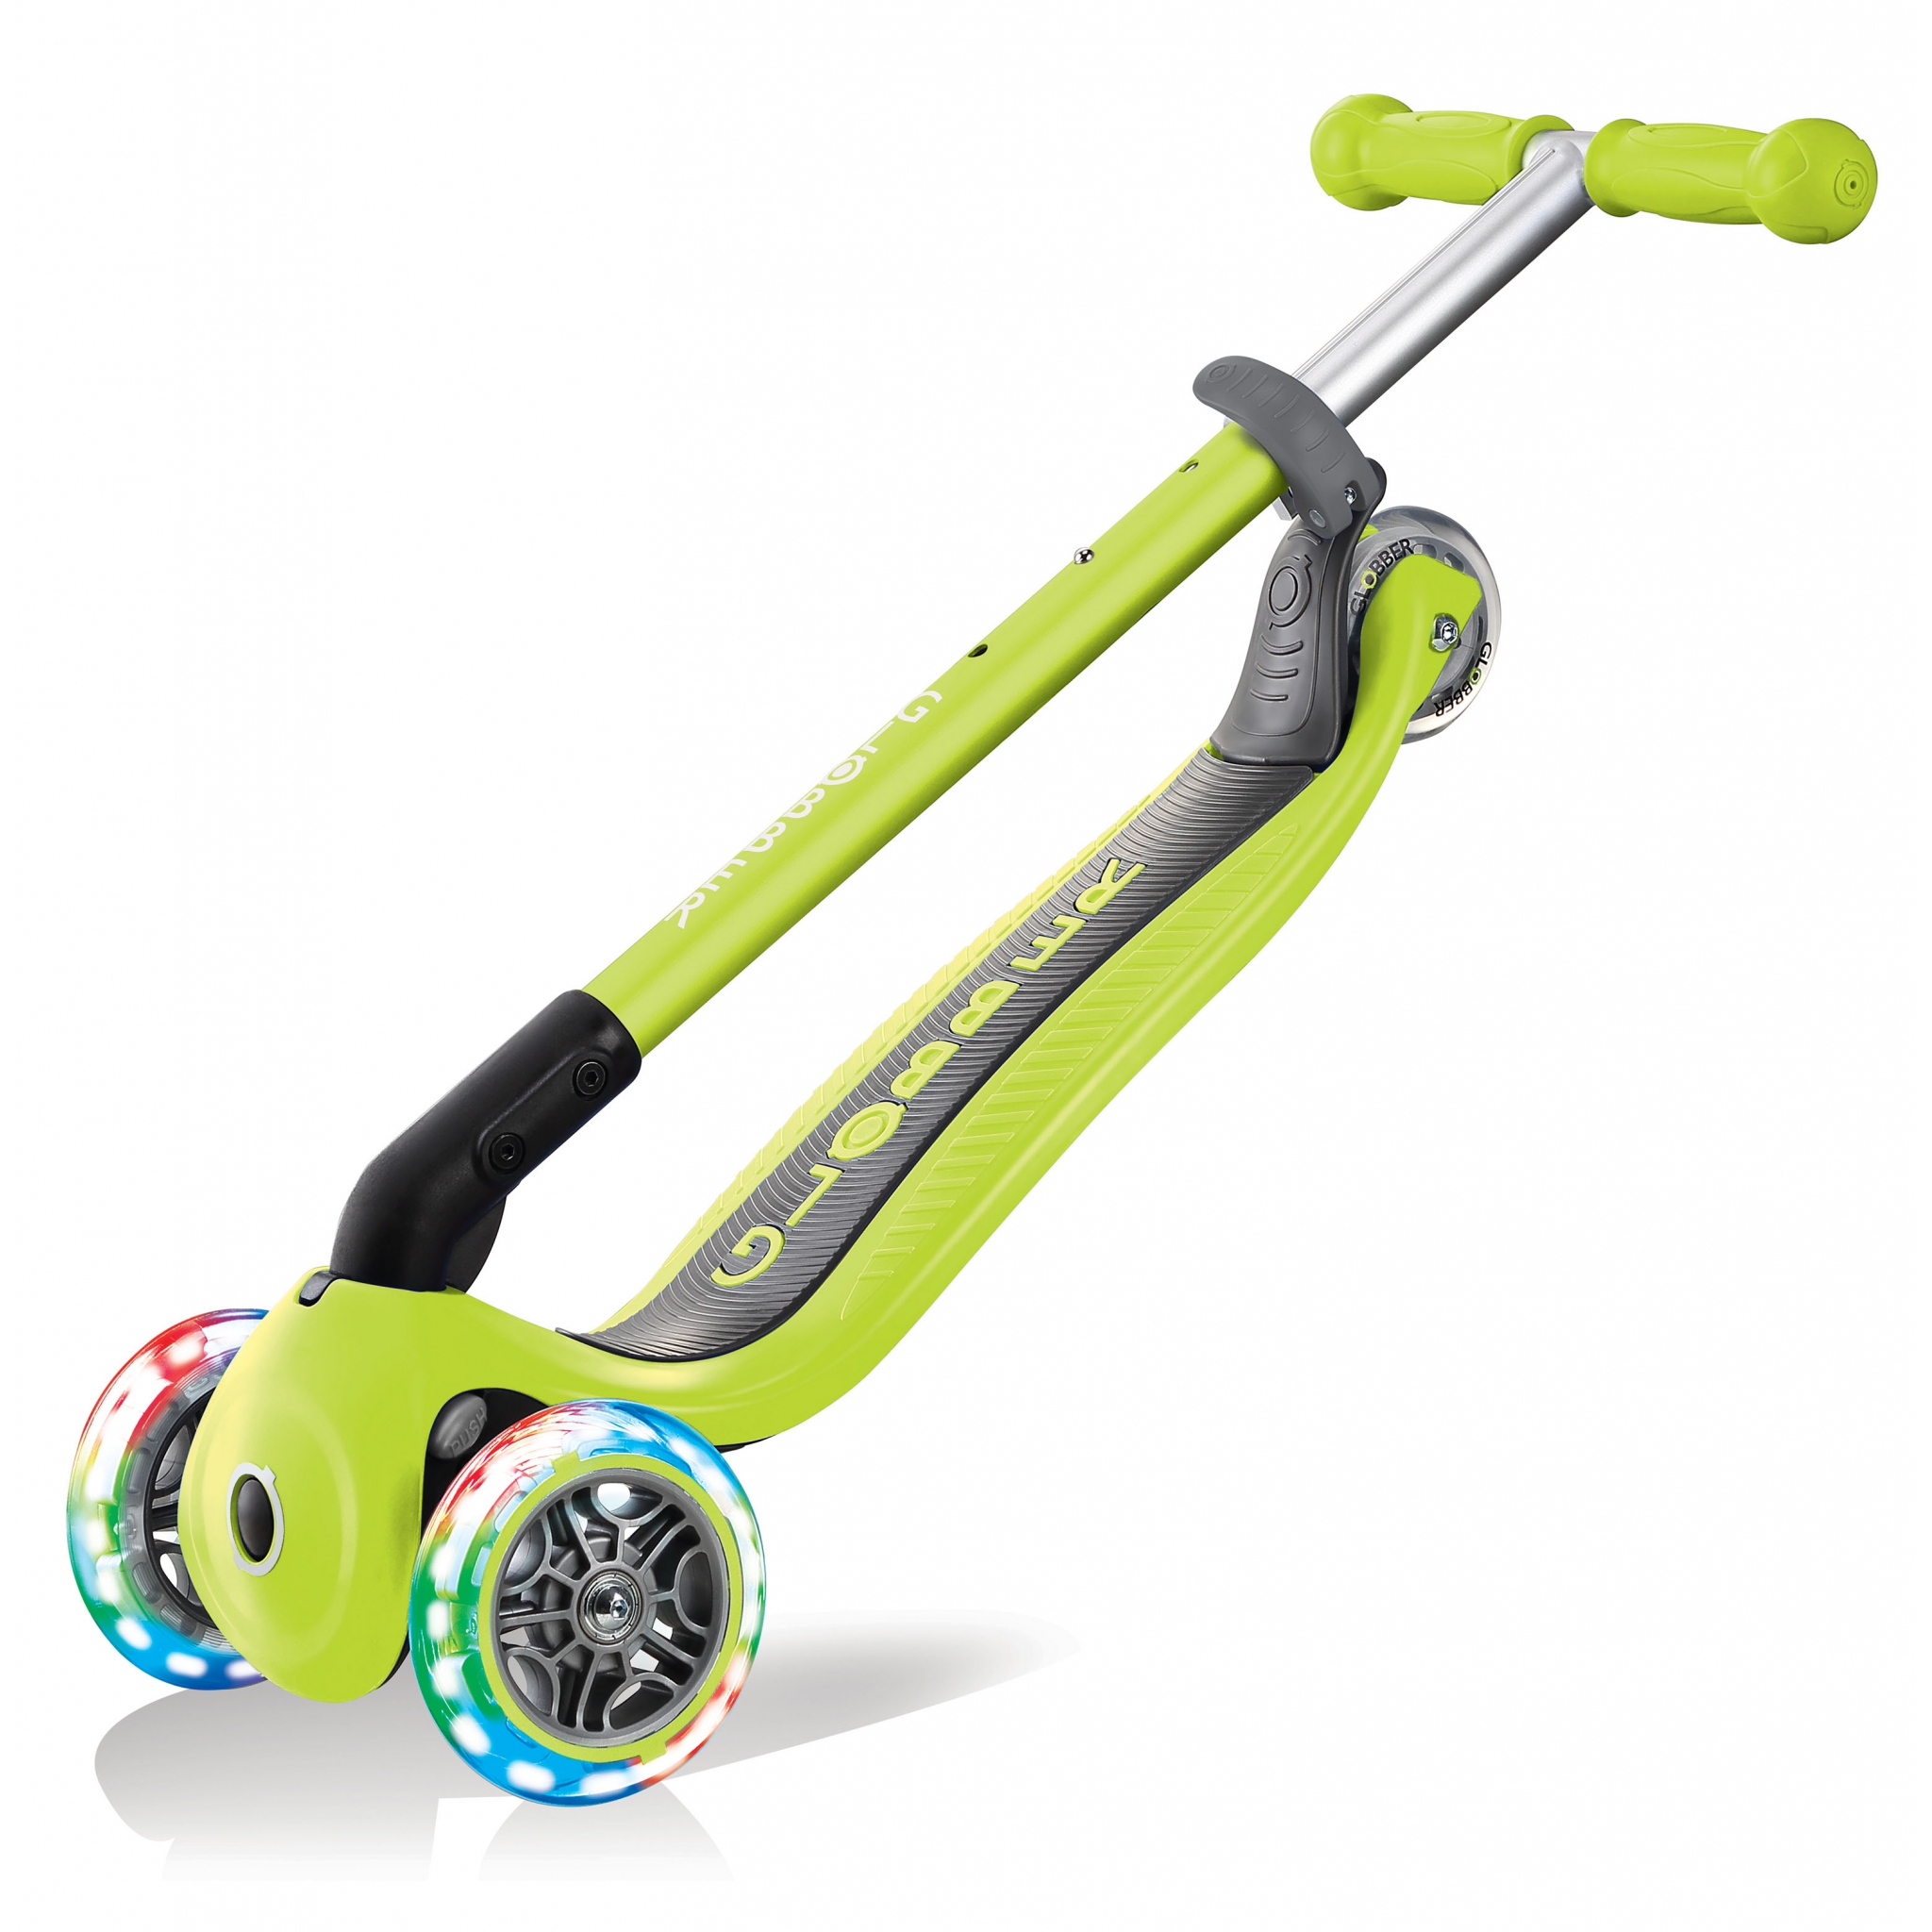 PRIMO-FOLDABLE-LIGHTS-3-wheel-foldable-scooter-for-kids-trolley-mode-lime-green 2